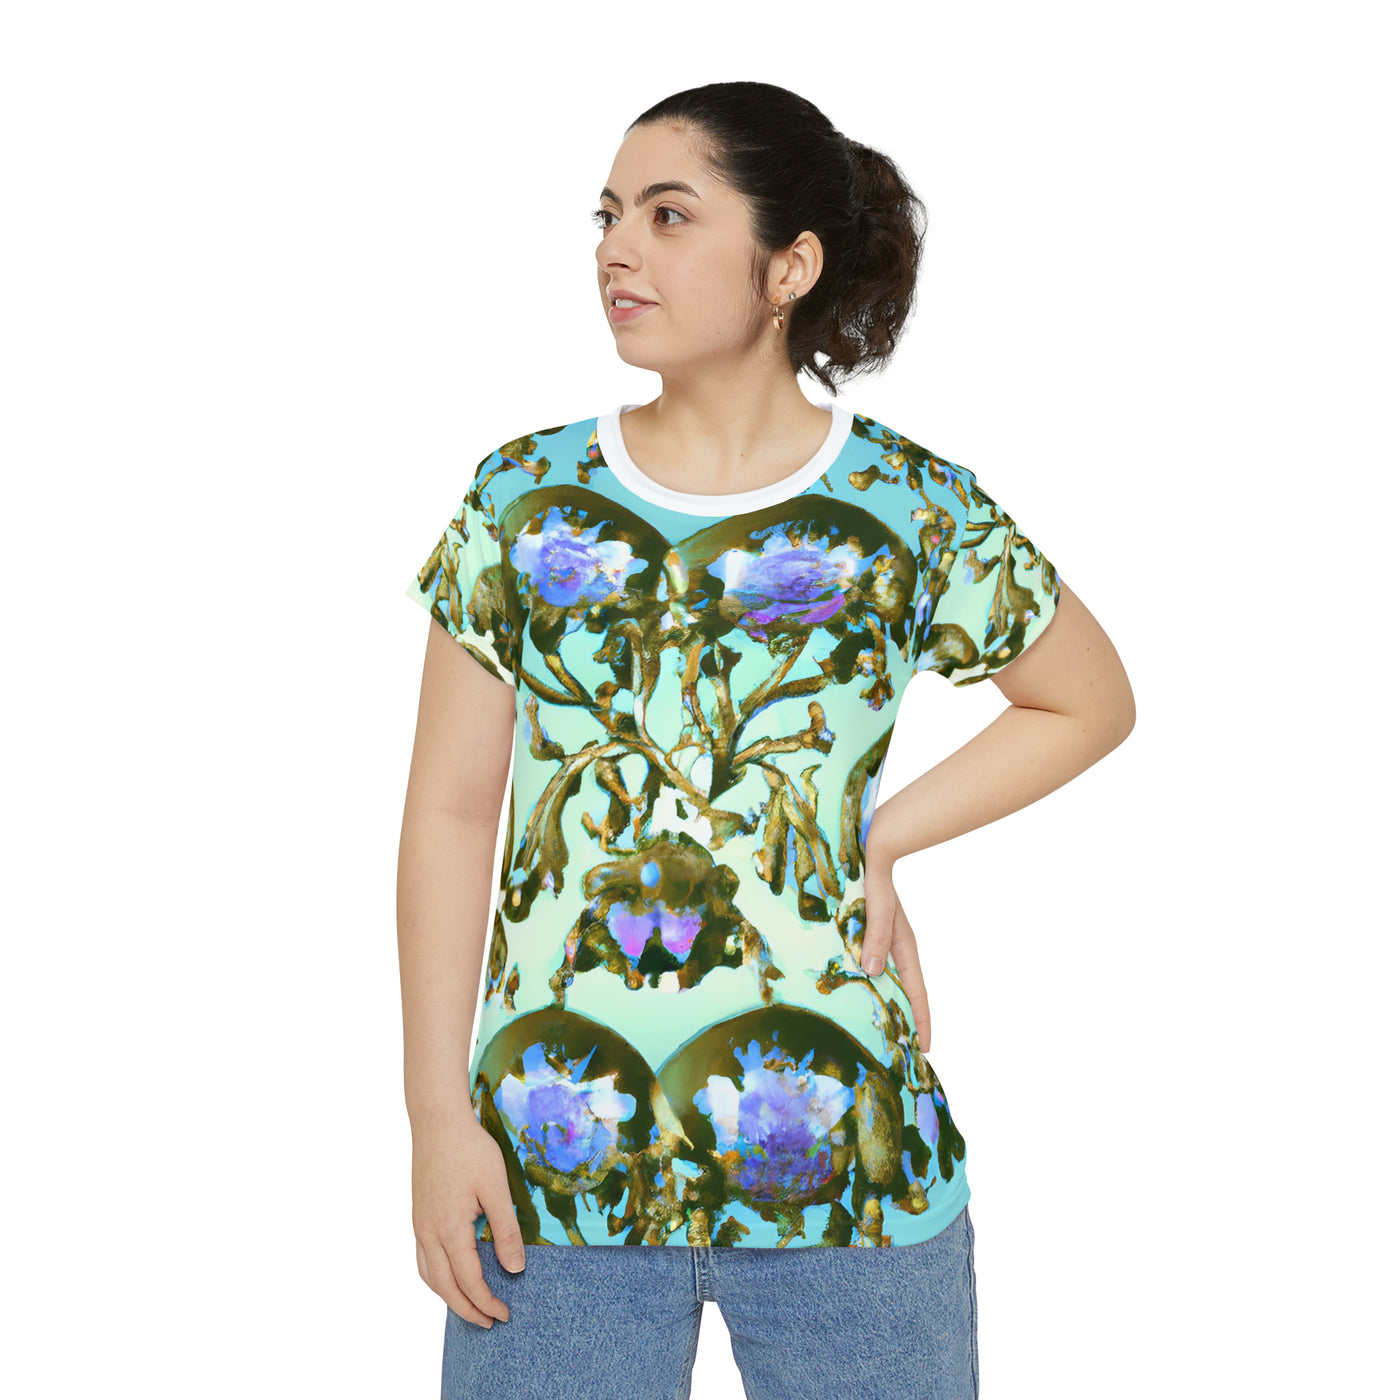 "Rugby Scrum of Color" Women's Short Sleeve Shirt